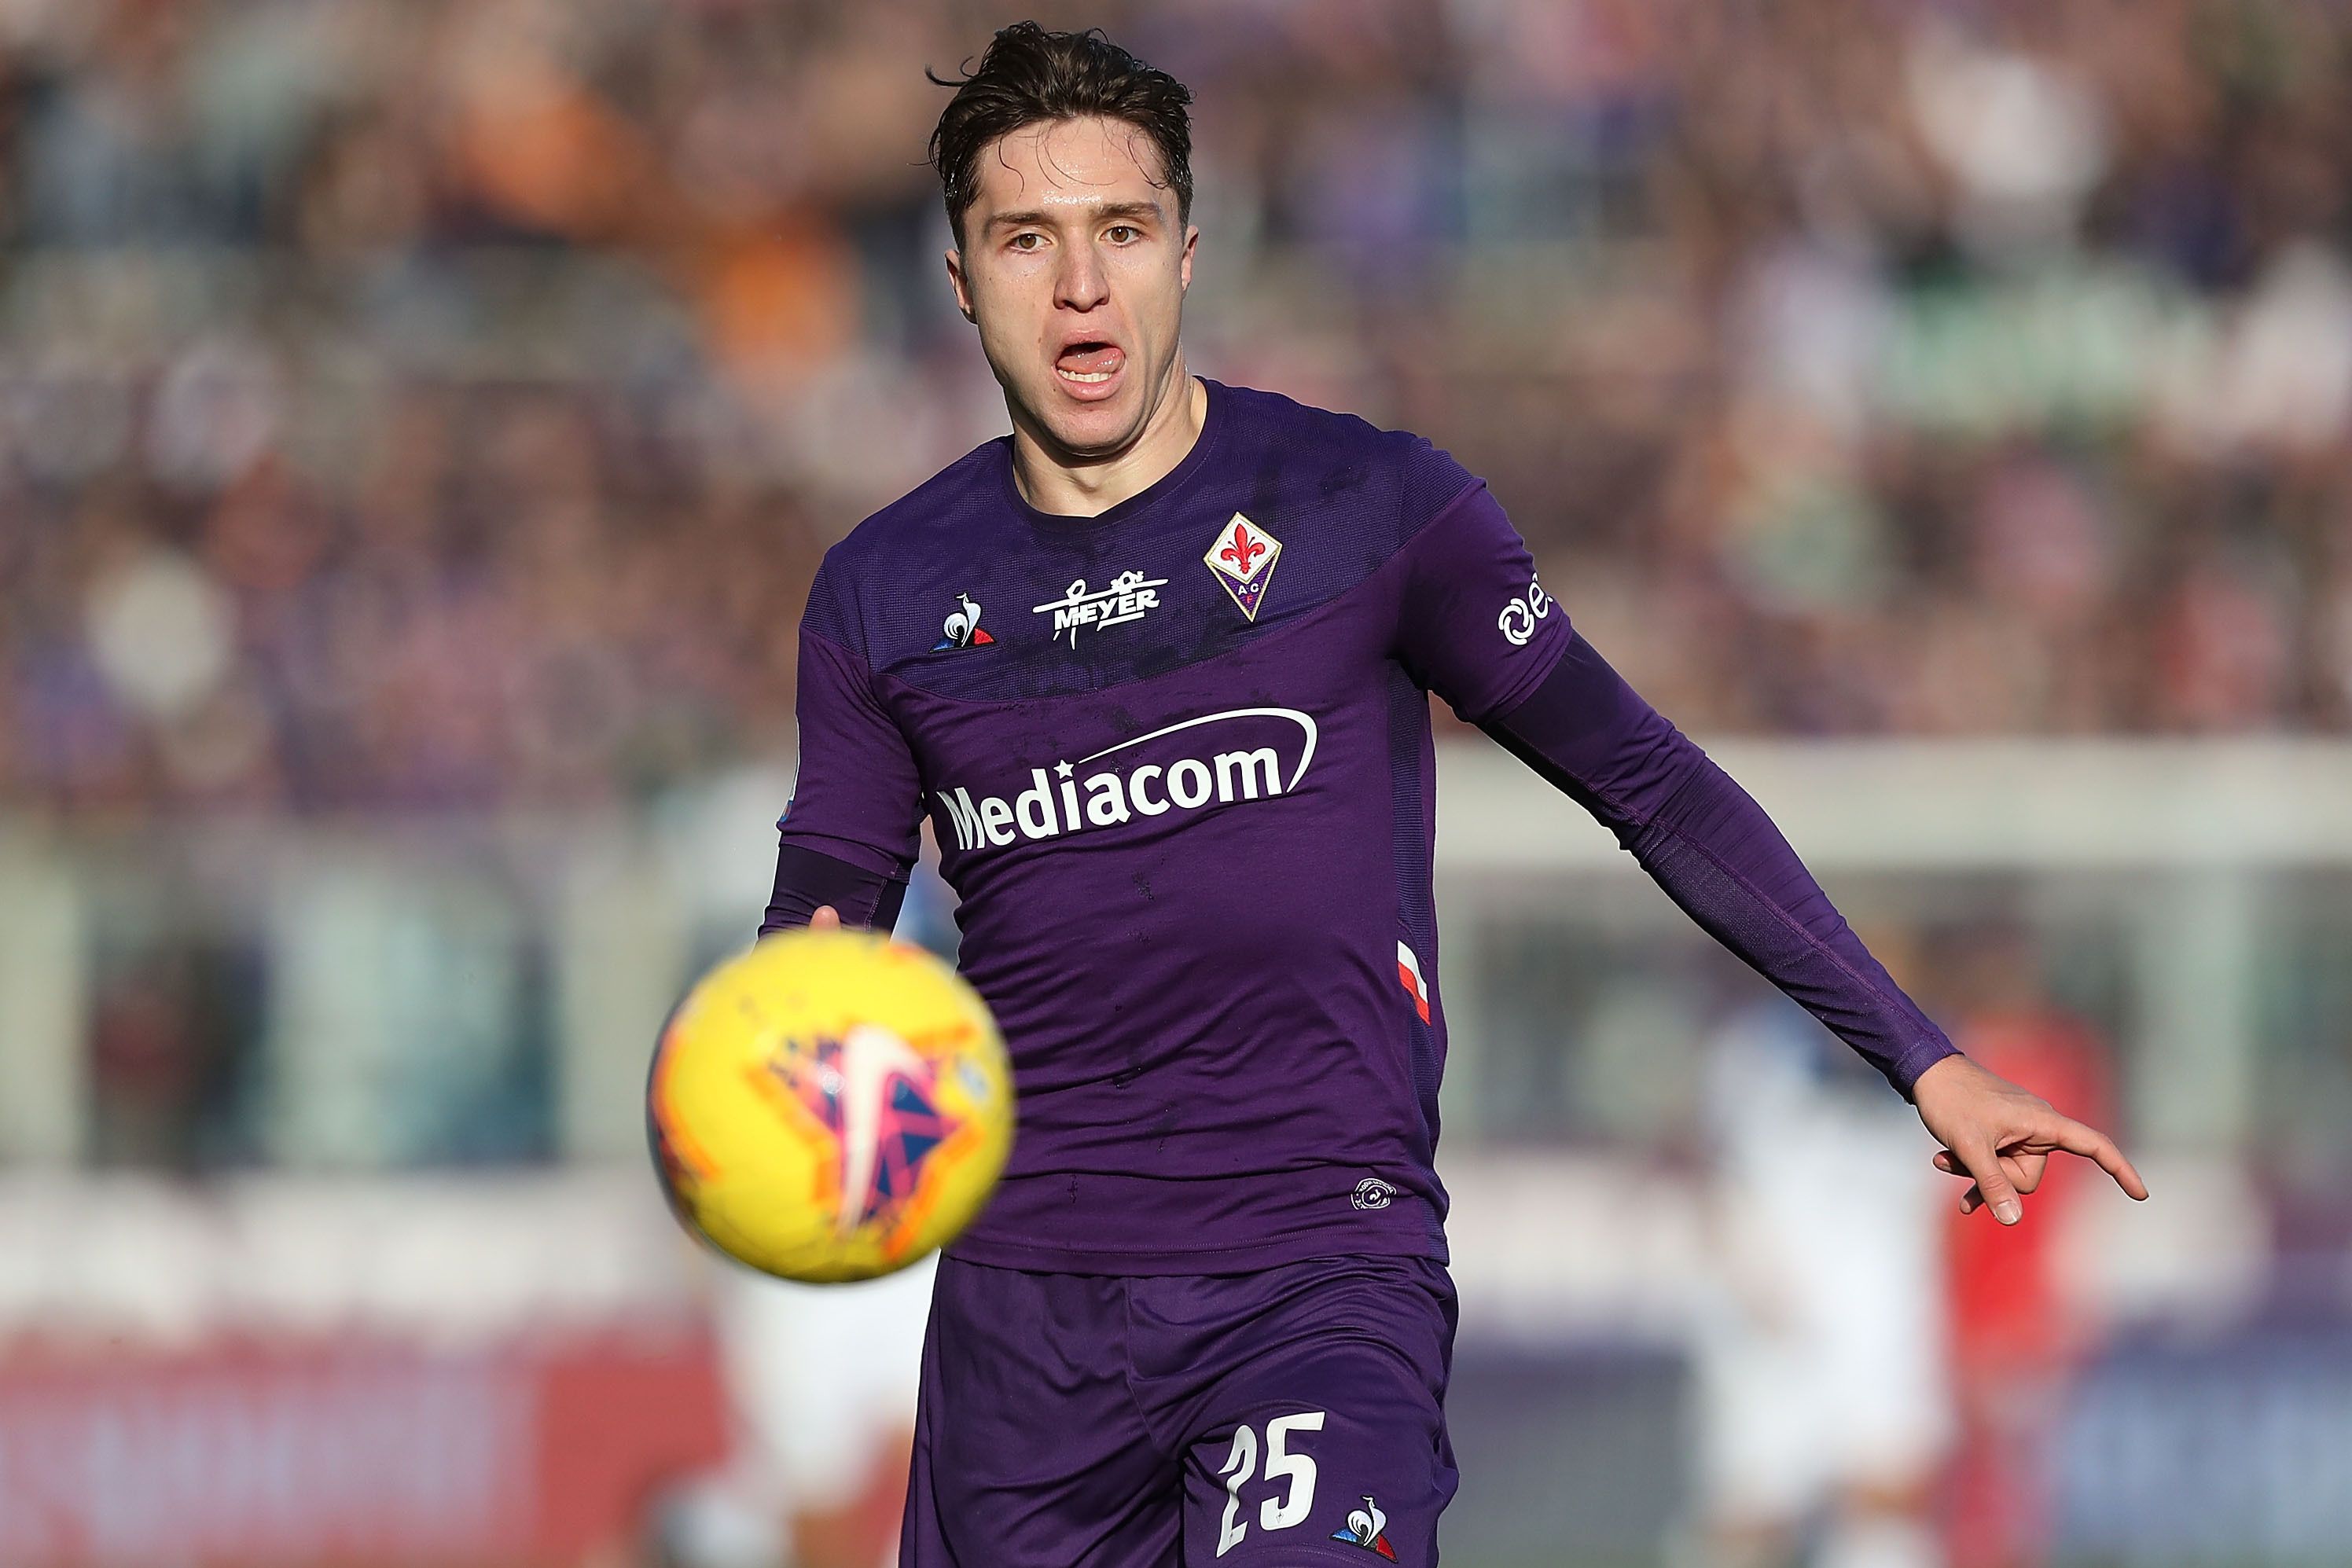 Cesare Prandelli Says Fiorentina's Federico Chiesa Can Be Best Player in Europe. Bleacher Report. Latest News, Videos and Highlights